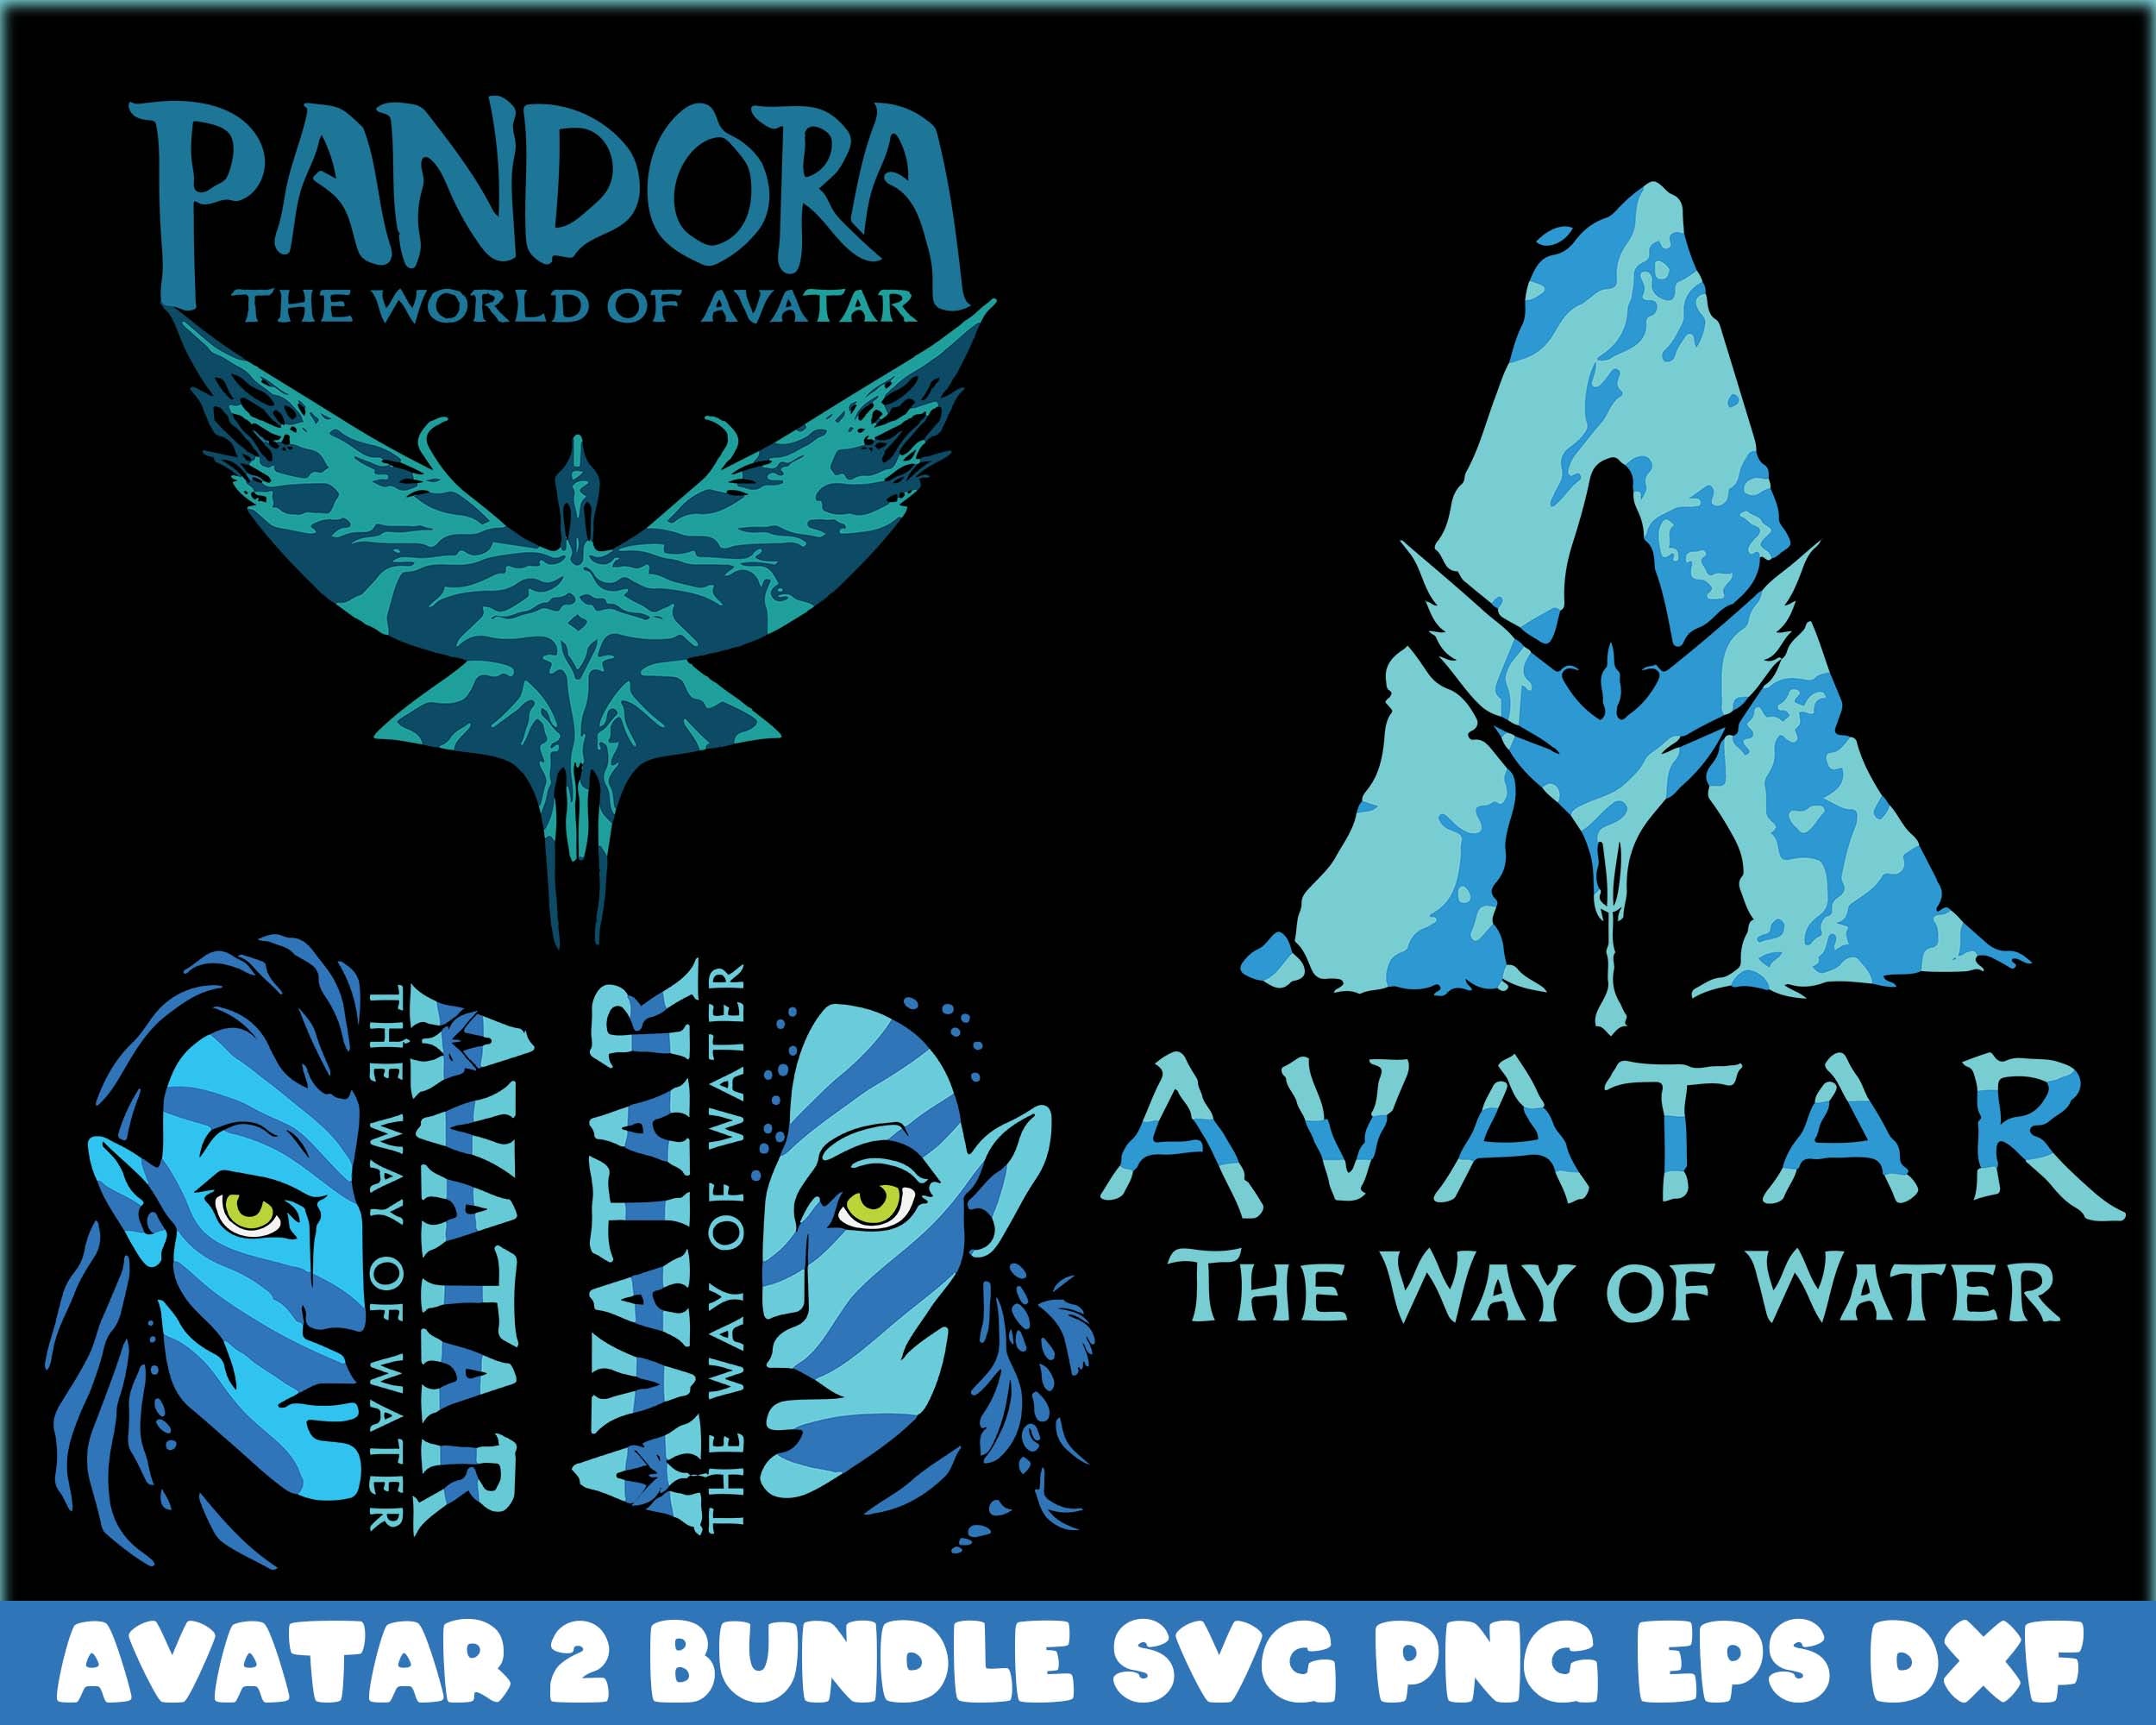 Avatar The Way of Water bundle, Avatar 2 SVG, png, eps, dxf, Digital download